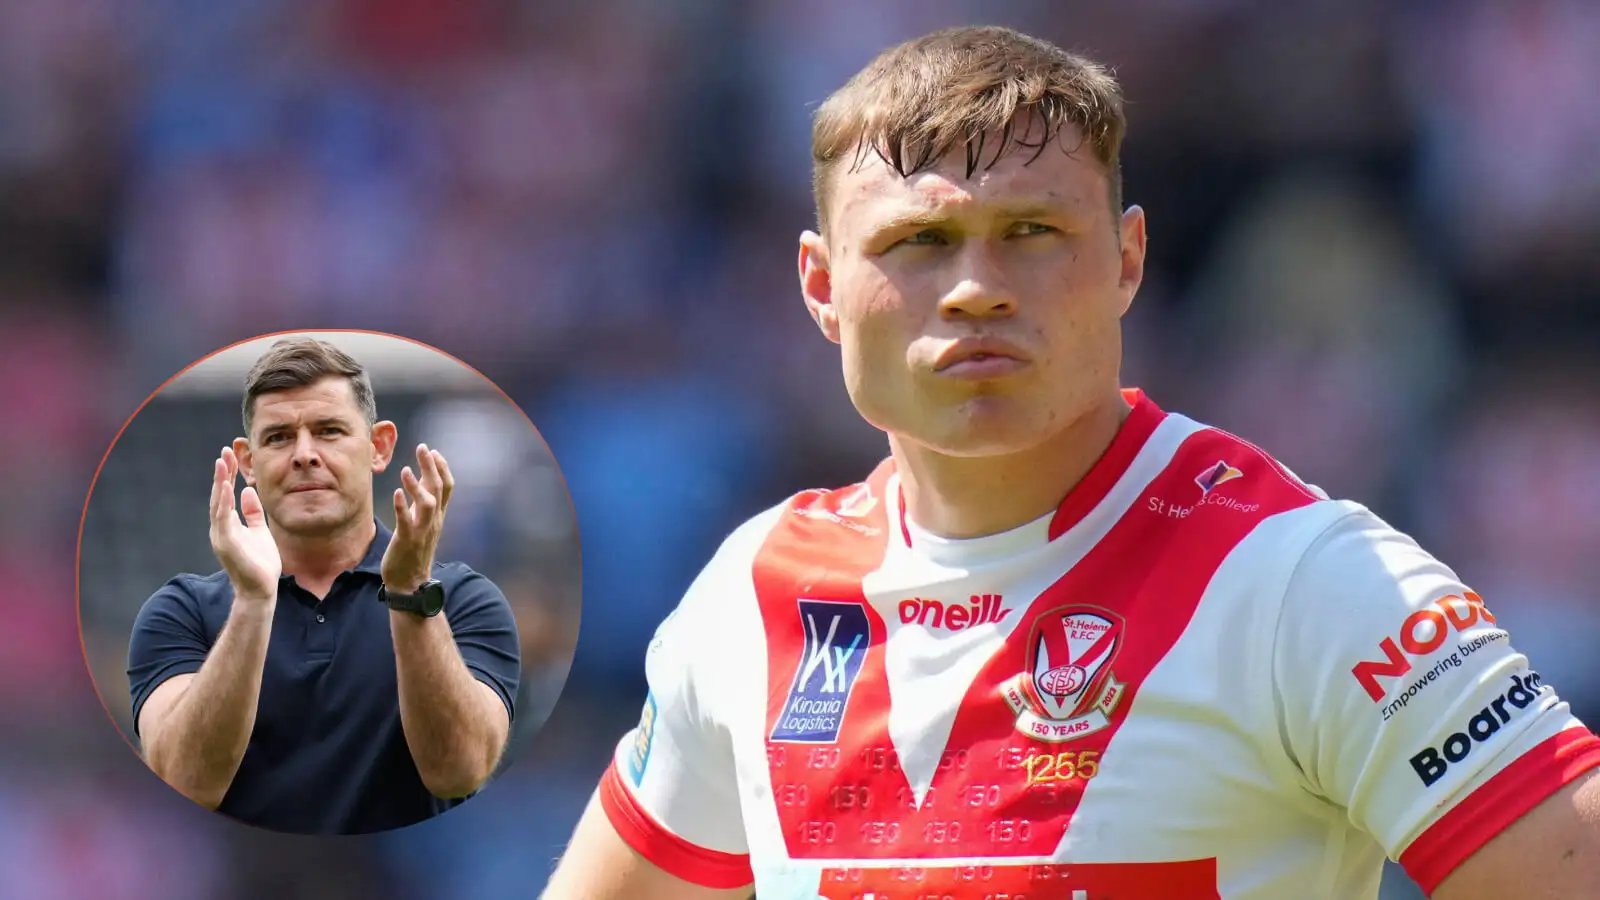 St Helens boss Paul Wellens heaps praise on ‘throwback’ young star: ‘He’s a big contributor to what we’re about now’